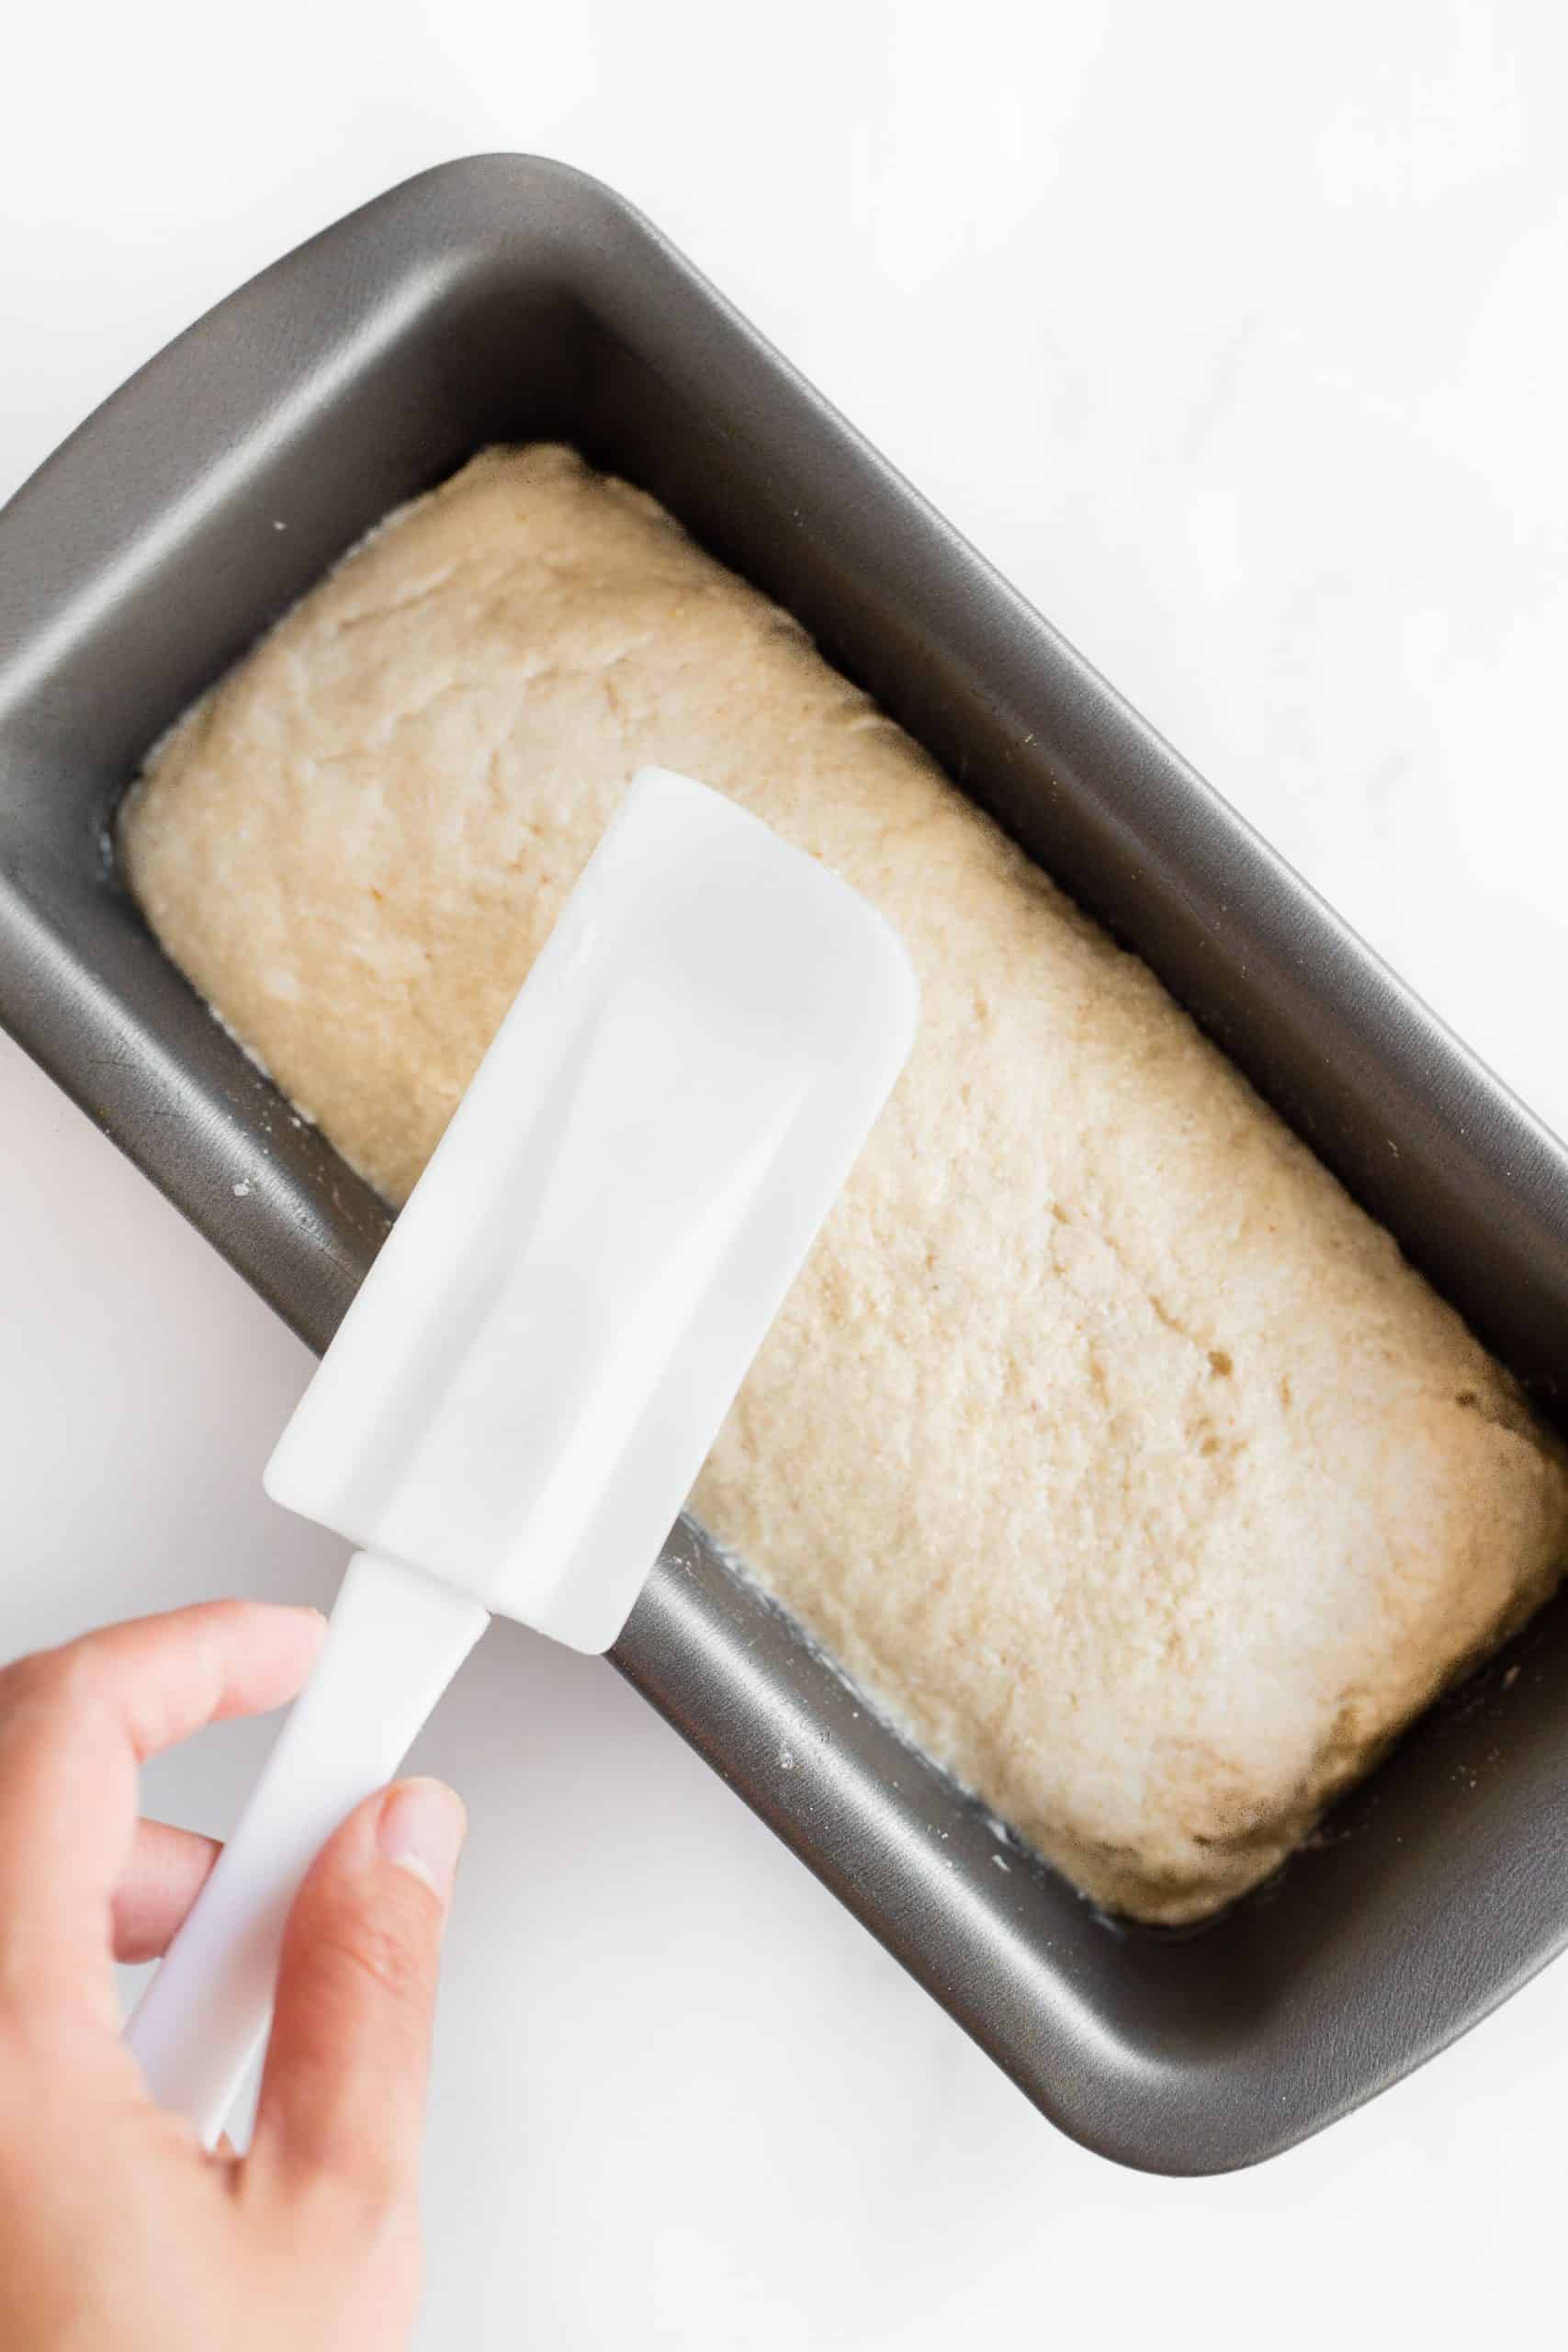 Using a spatula to smooth out the top of bread dough in a pan.